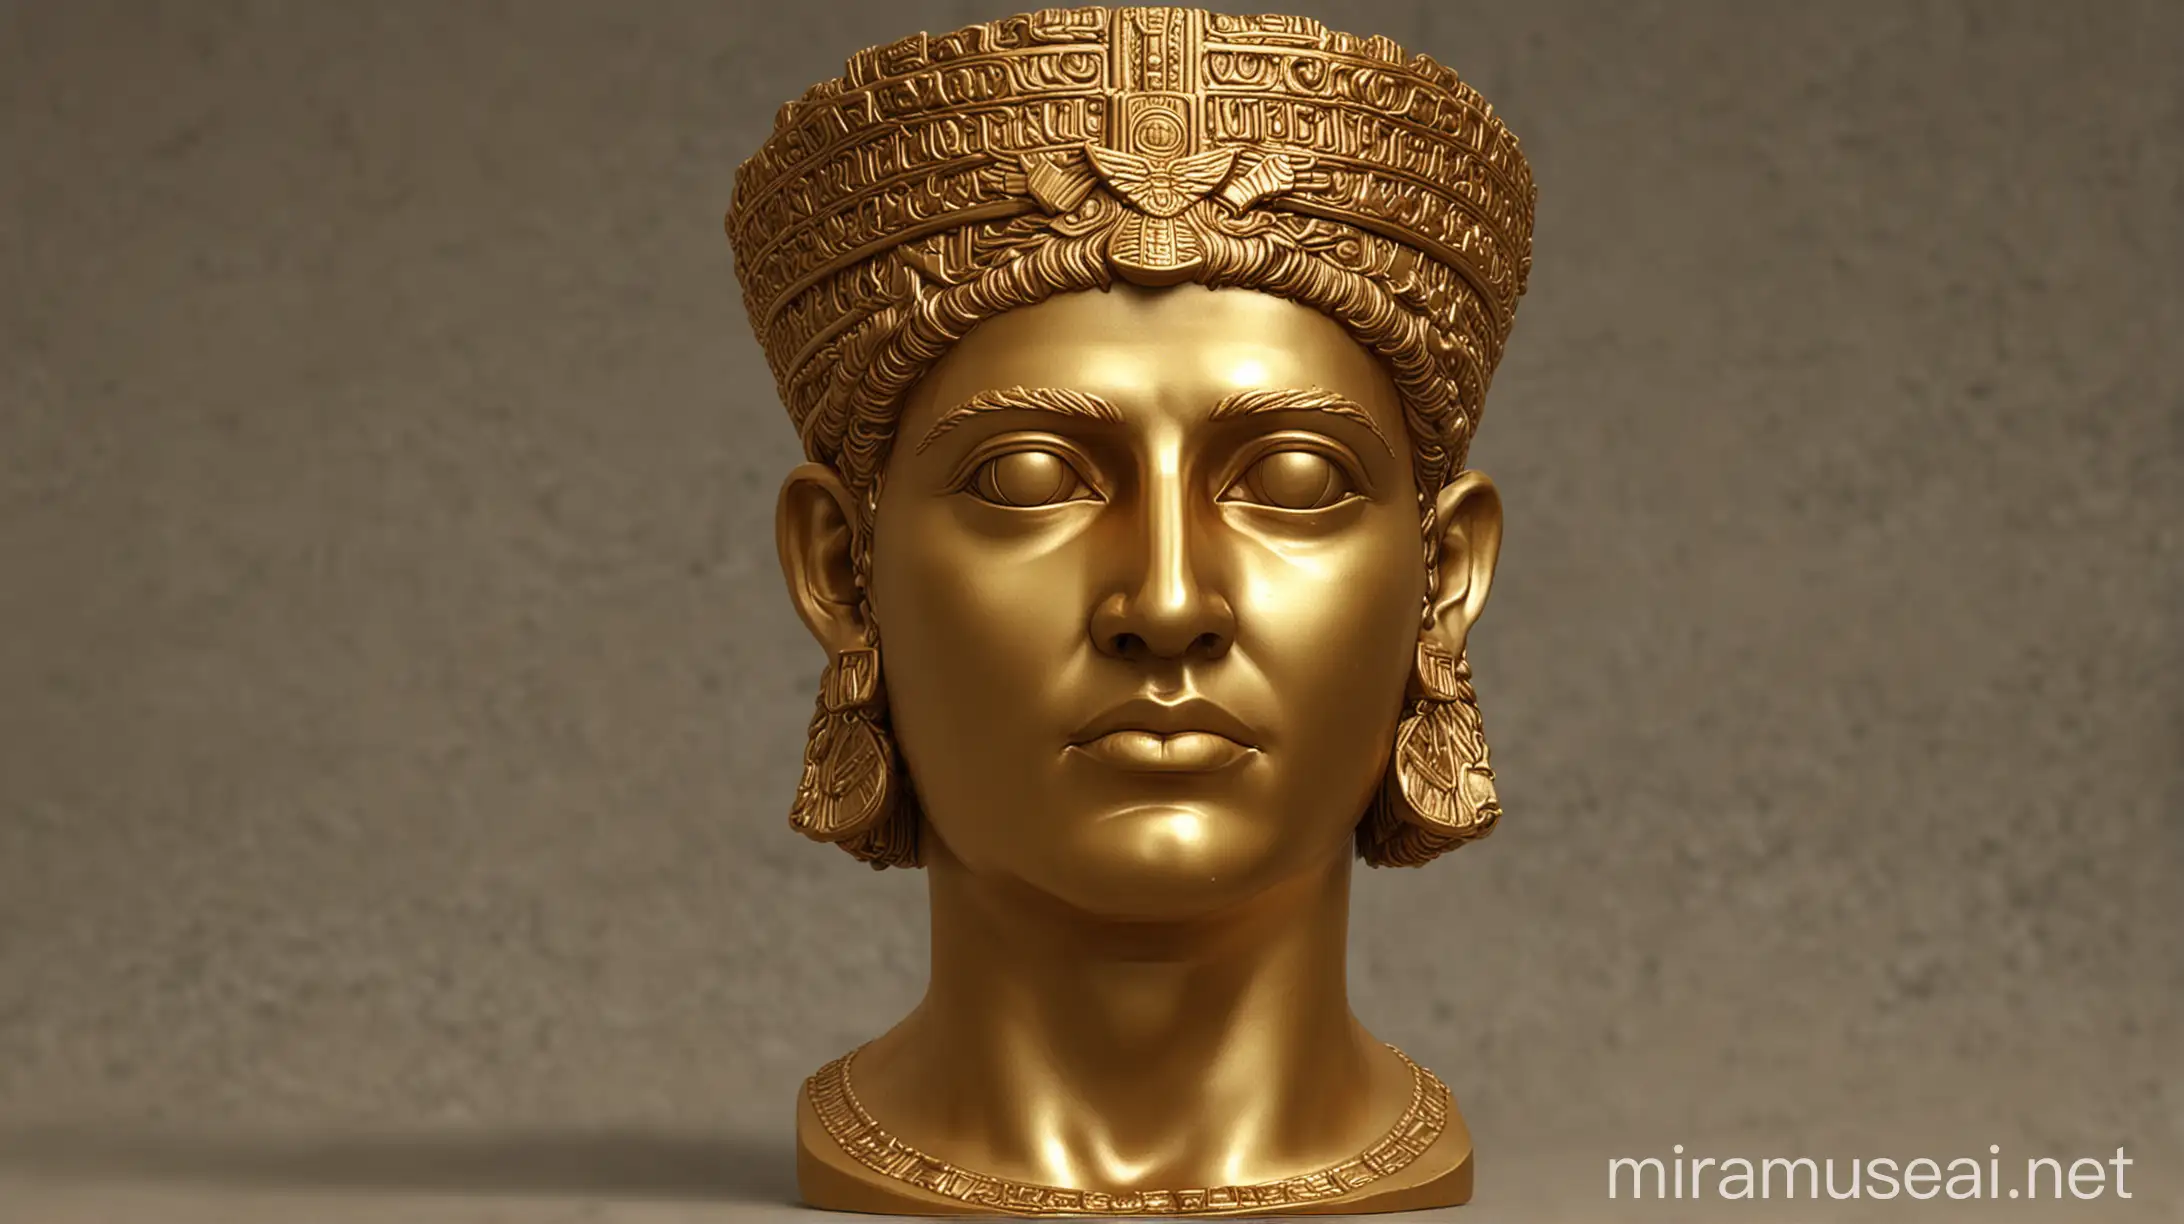 Babylonian Empire - Golden Head Statue

Prompt: Create an illustration of a majestic golden statue representing the Babylonian Empire, with intricate details and a regal crown, symbolizing its status as the "golden head" in Daniel's dream.